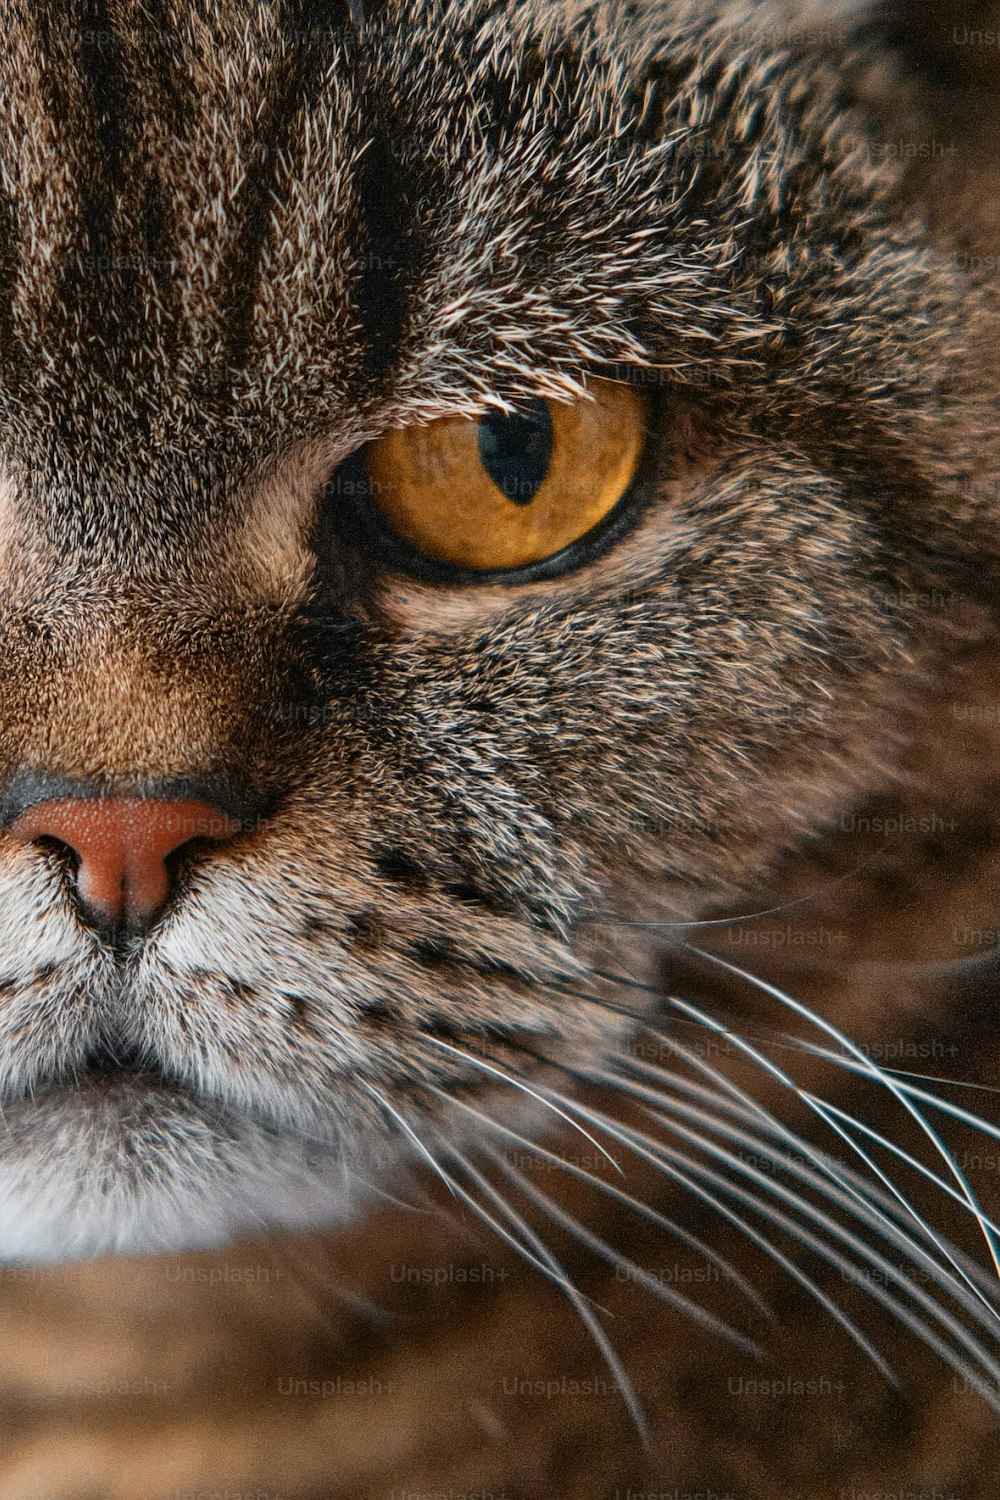 a close up of a cat's face with yellow eyes